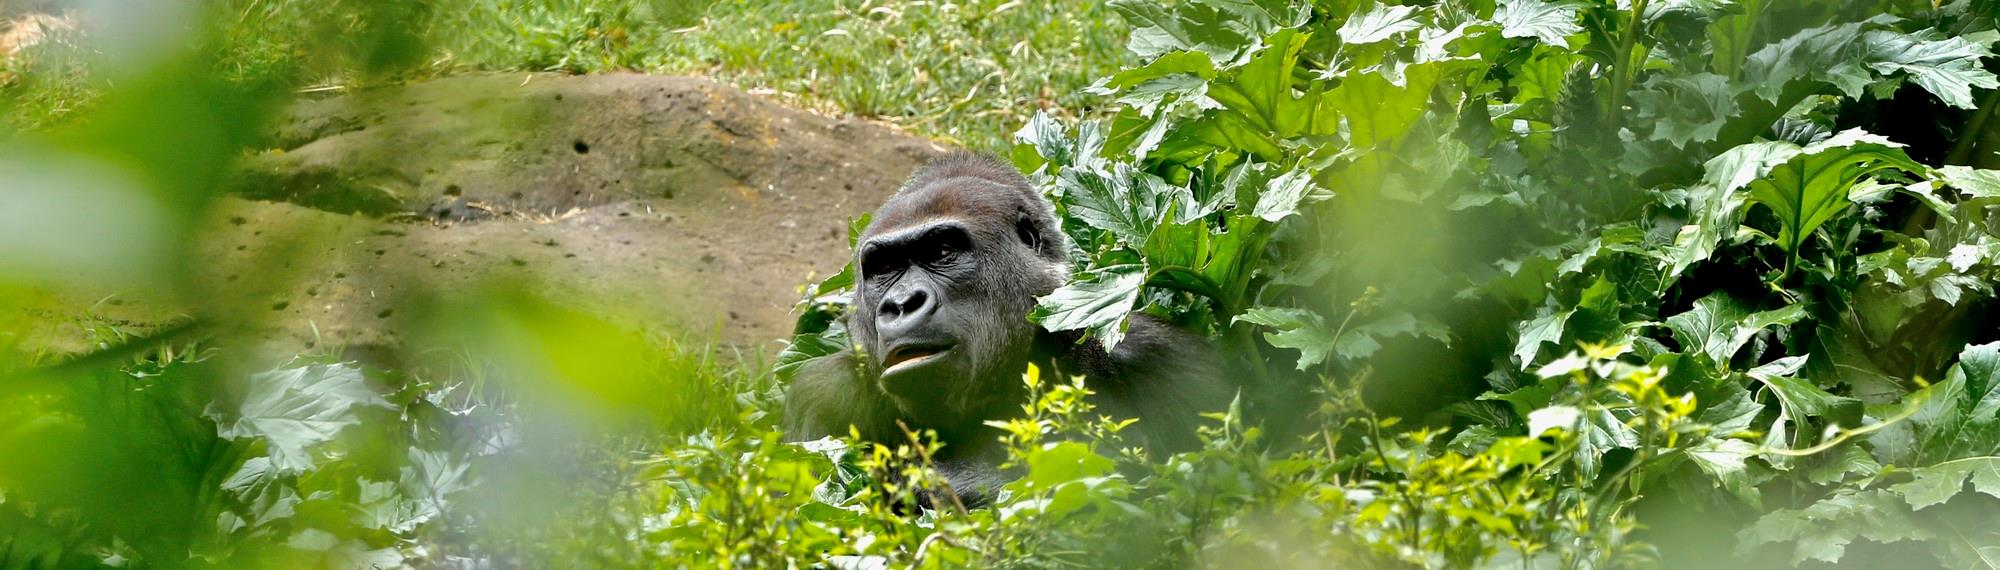 Gorilla in bushes with body covered by leaves